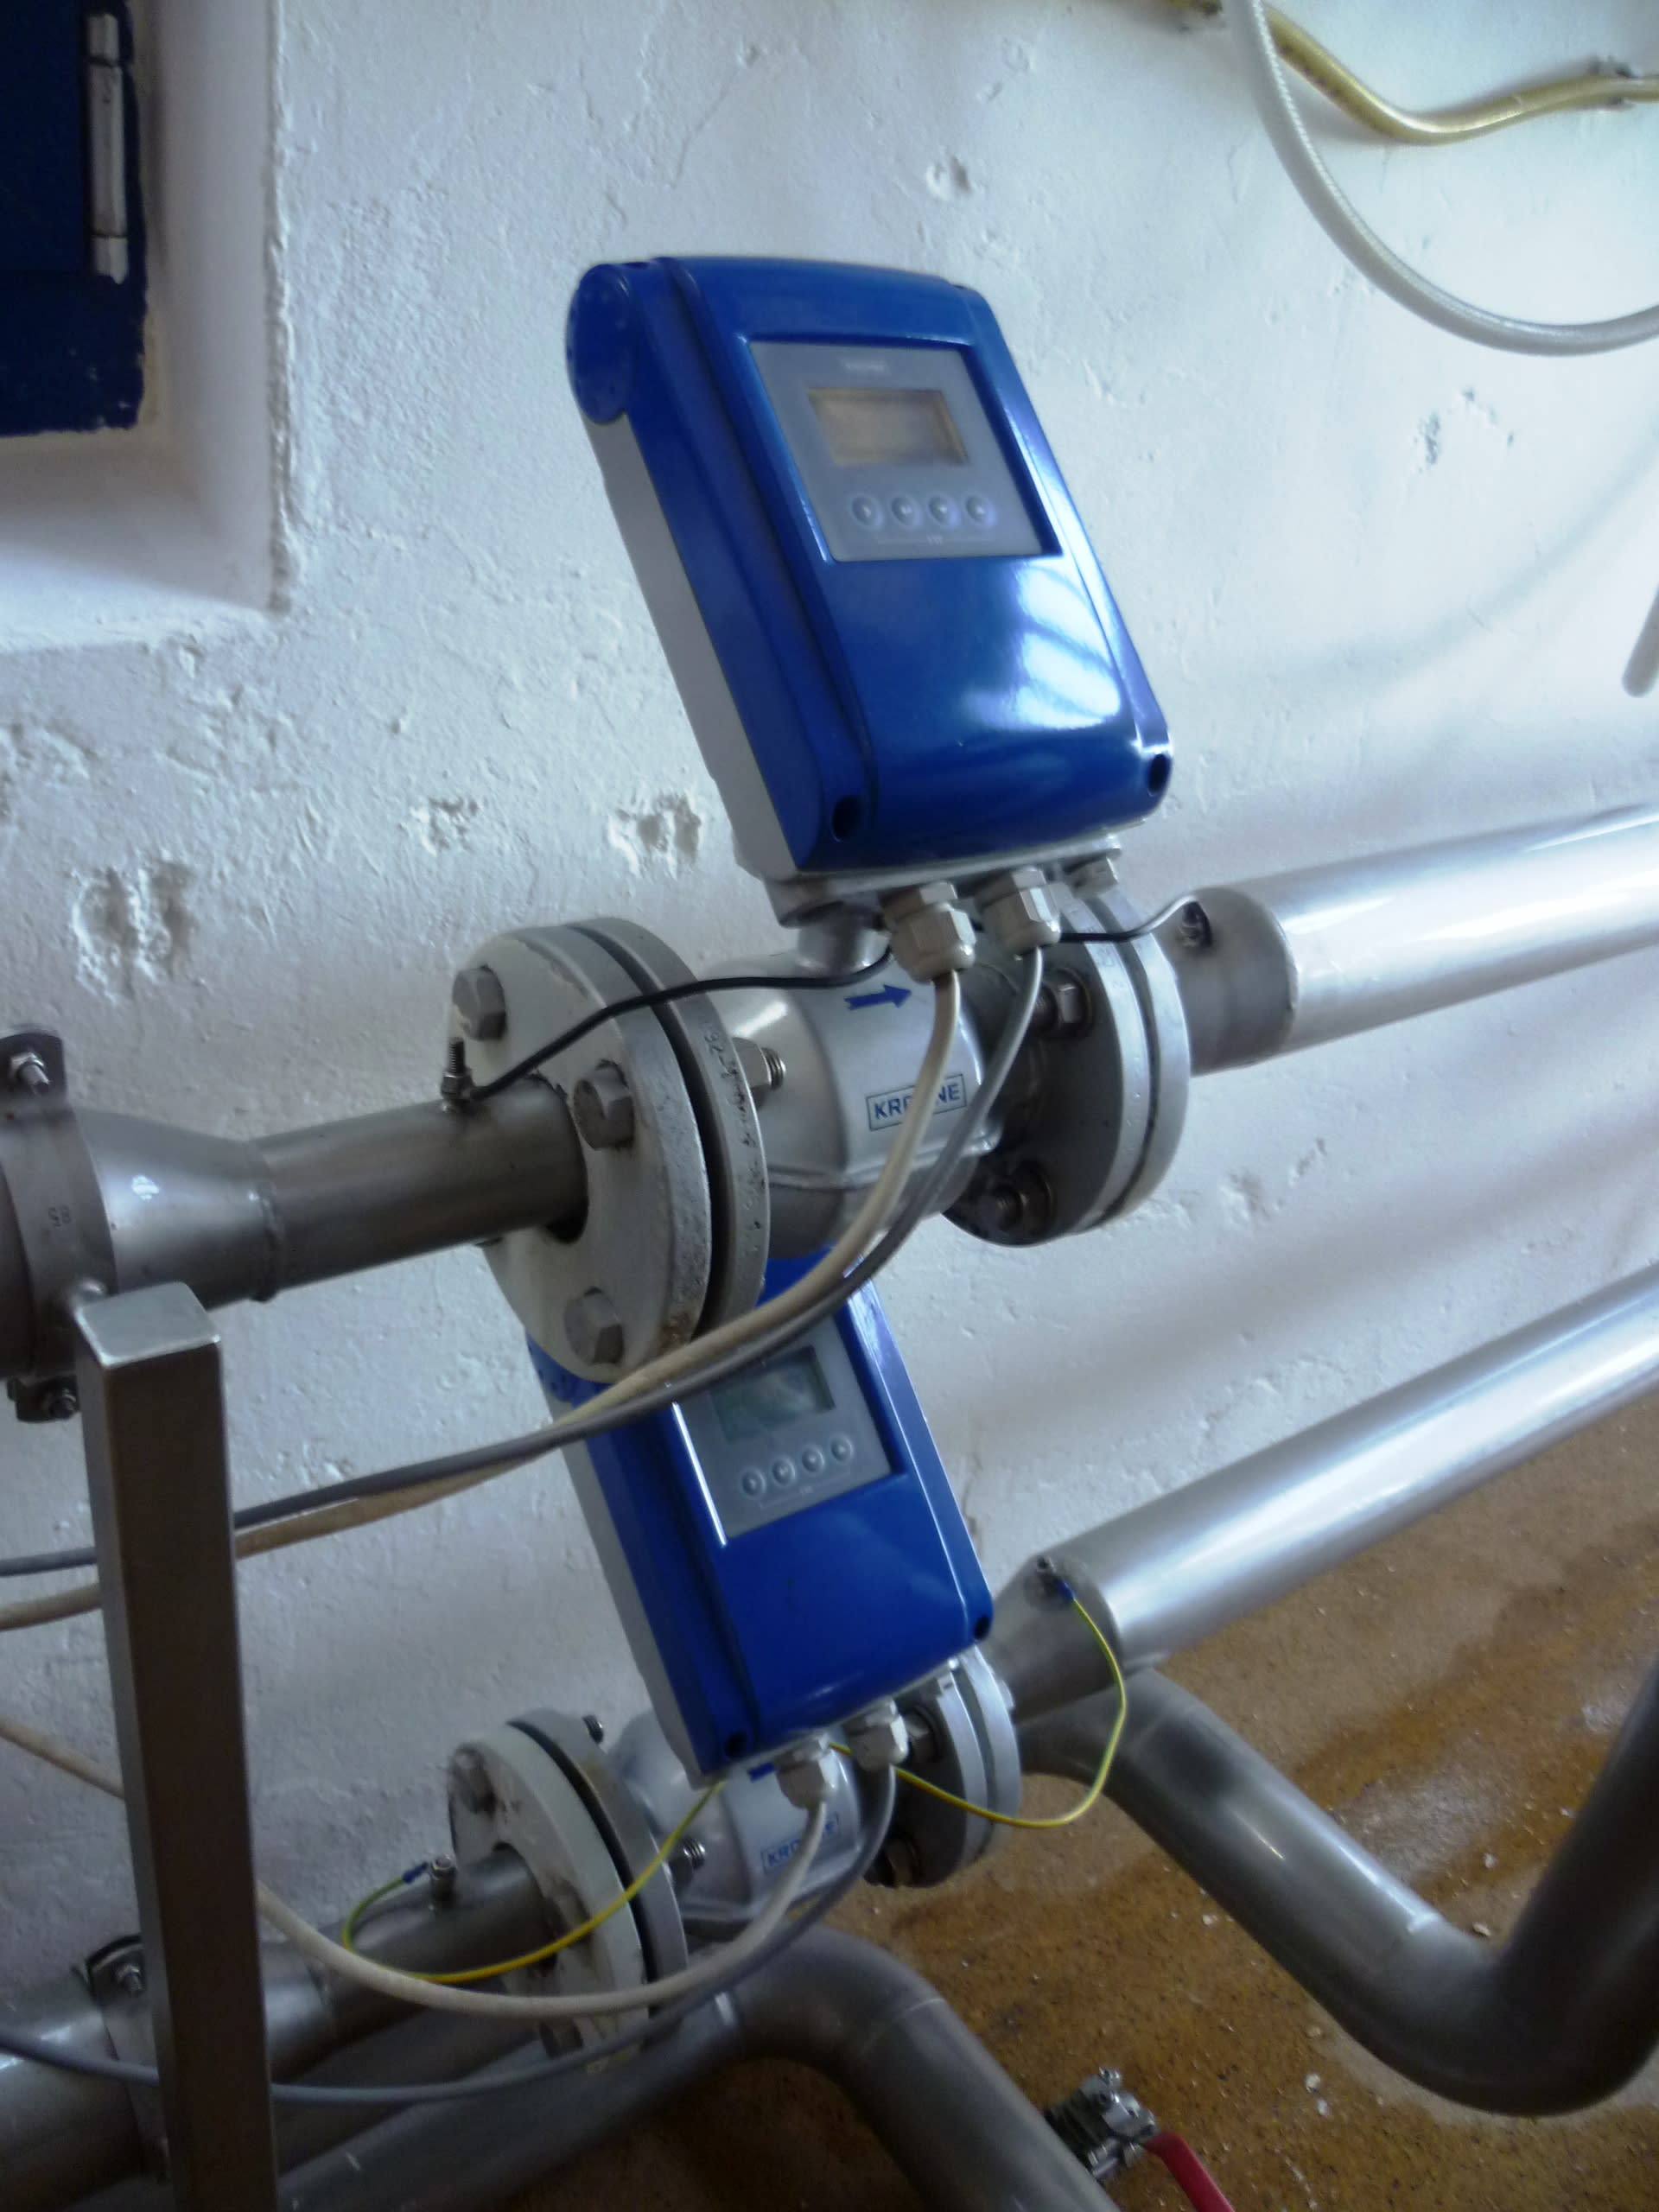 Water flow measurement with the Waterflux 3100 C